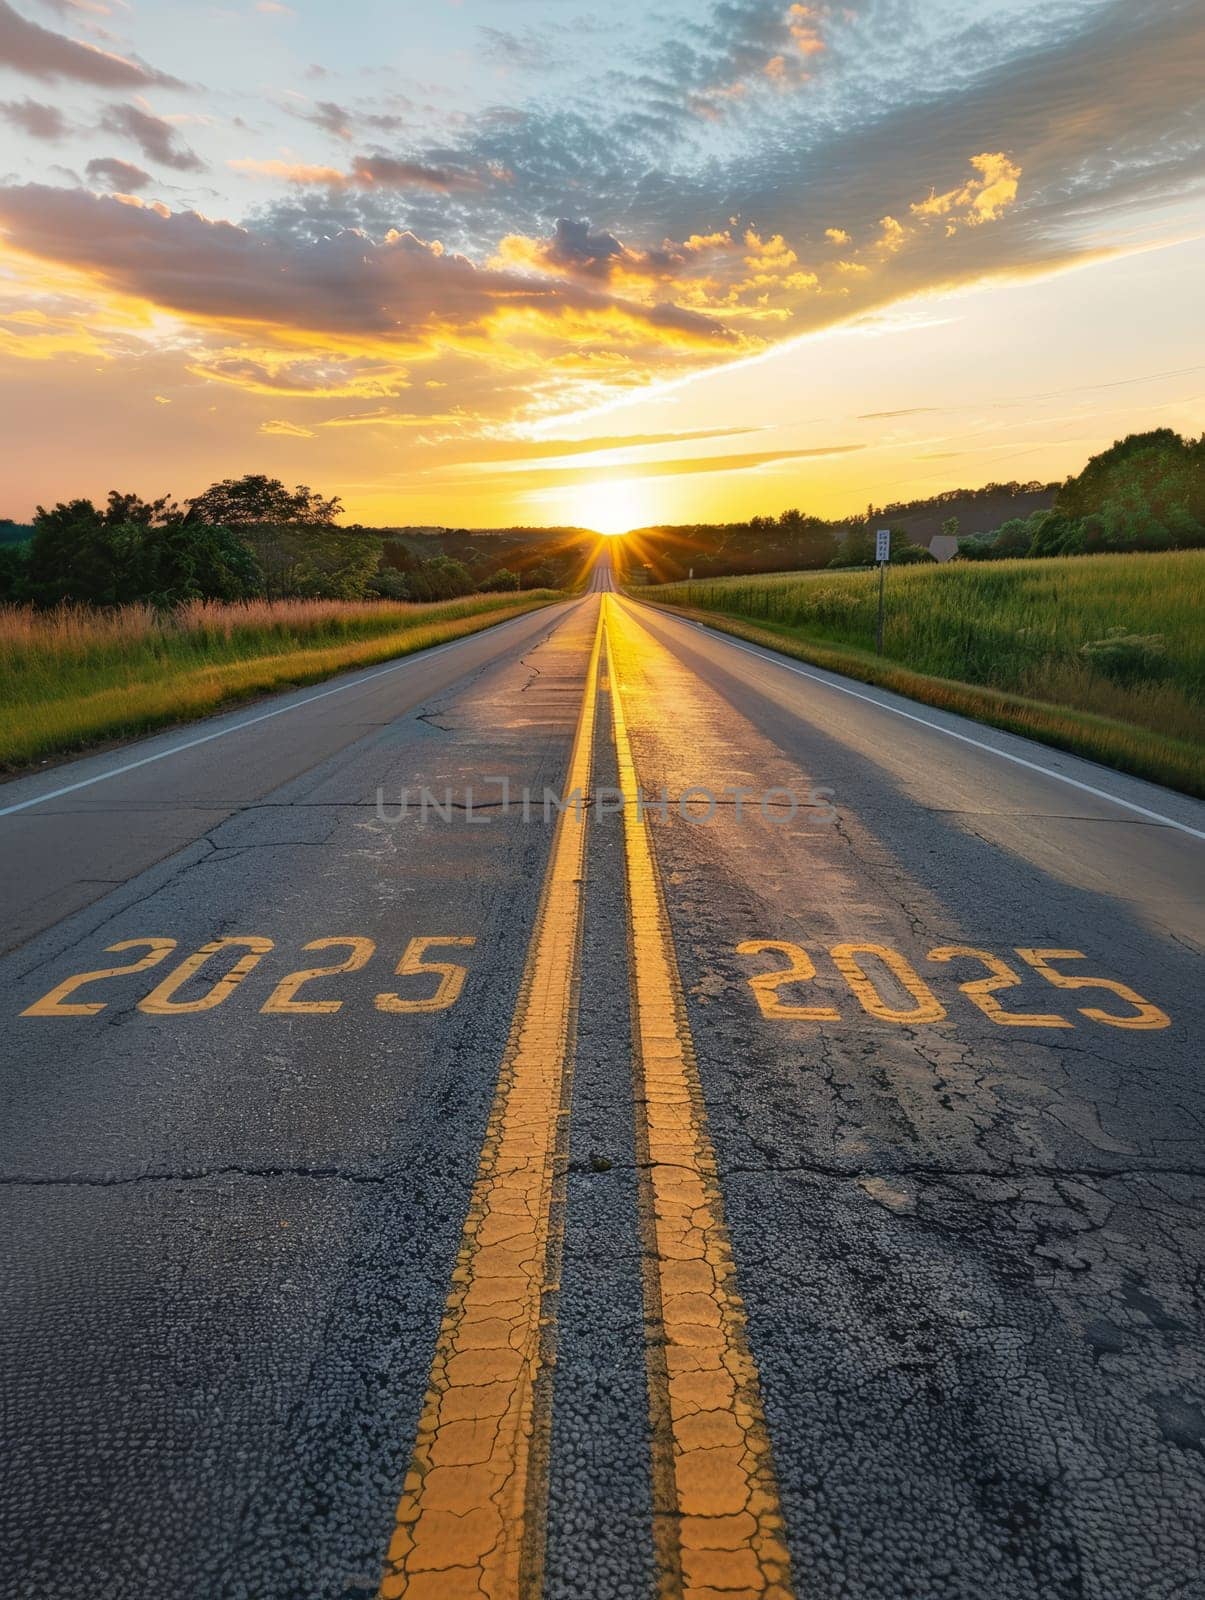 The year '2025' is emblazoned on a highway, glowing under a breathtaking sunset. The journey forward is illuminated by the last golden rays of the day, promising bright prospects ahead. by sfinks